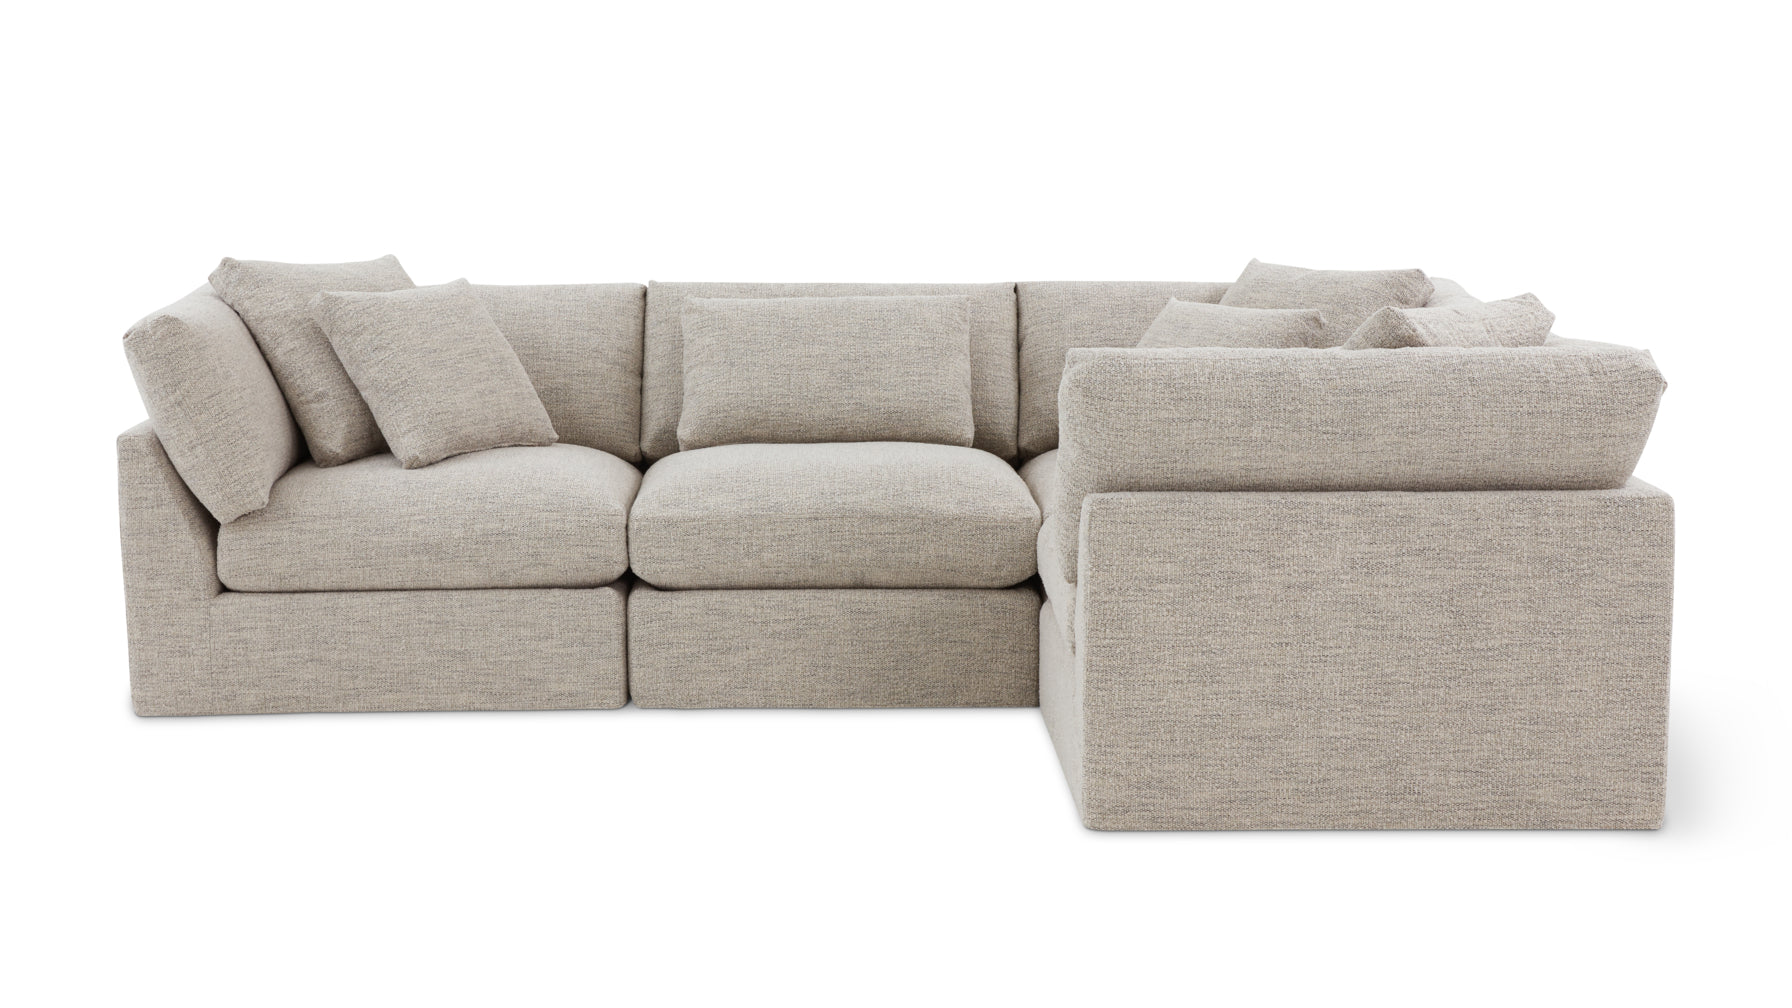 Get Together™ 4-Piece Modular Sectional Closed, Standard, Oatmeal - Image 1